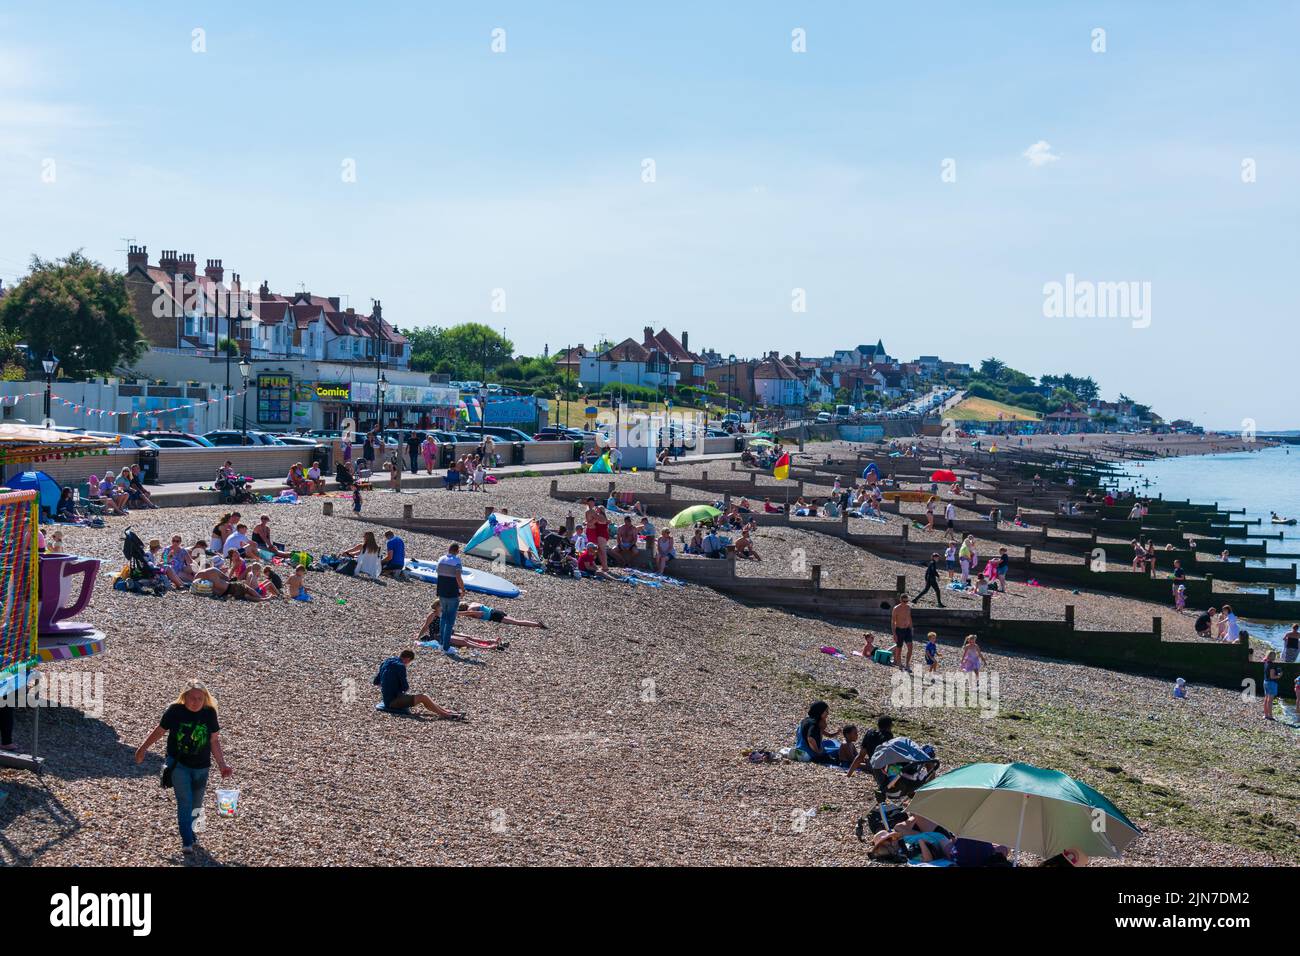 Herne Bay, Kent, UK - August 7 2022: Clear blue sky and warm temperatures with flocks of people swarming to the coast during an August weekend. Stock Photo